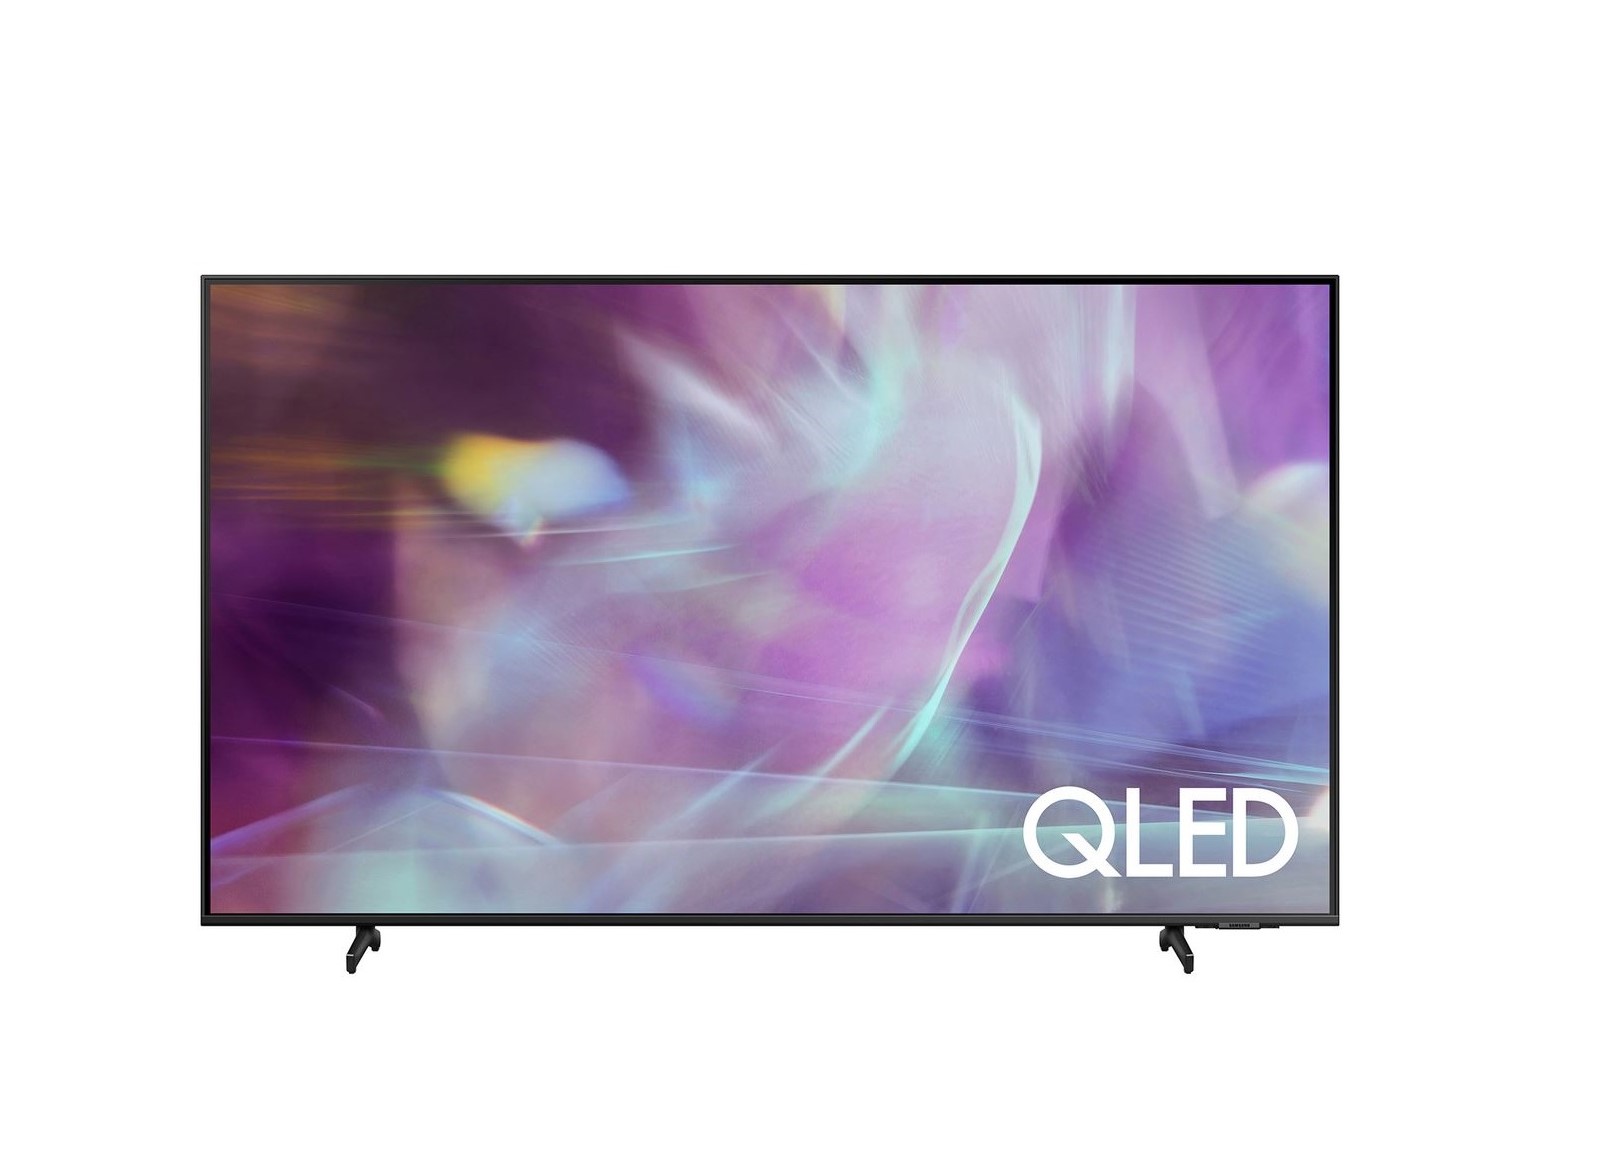 Samsung 32 inch Class Q60A QLED 4K Smart TV 2021 product image.